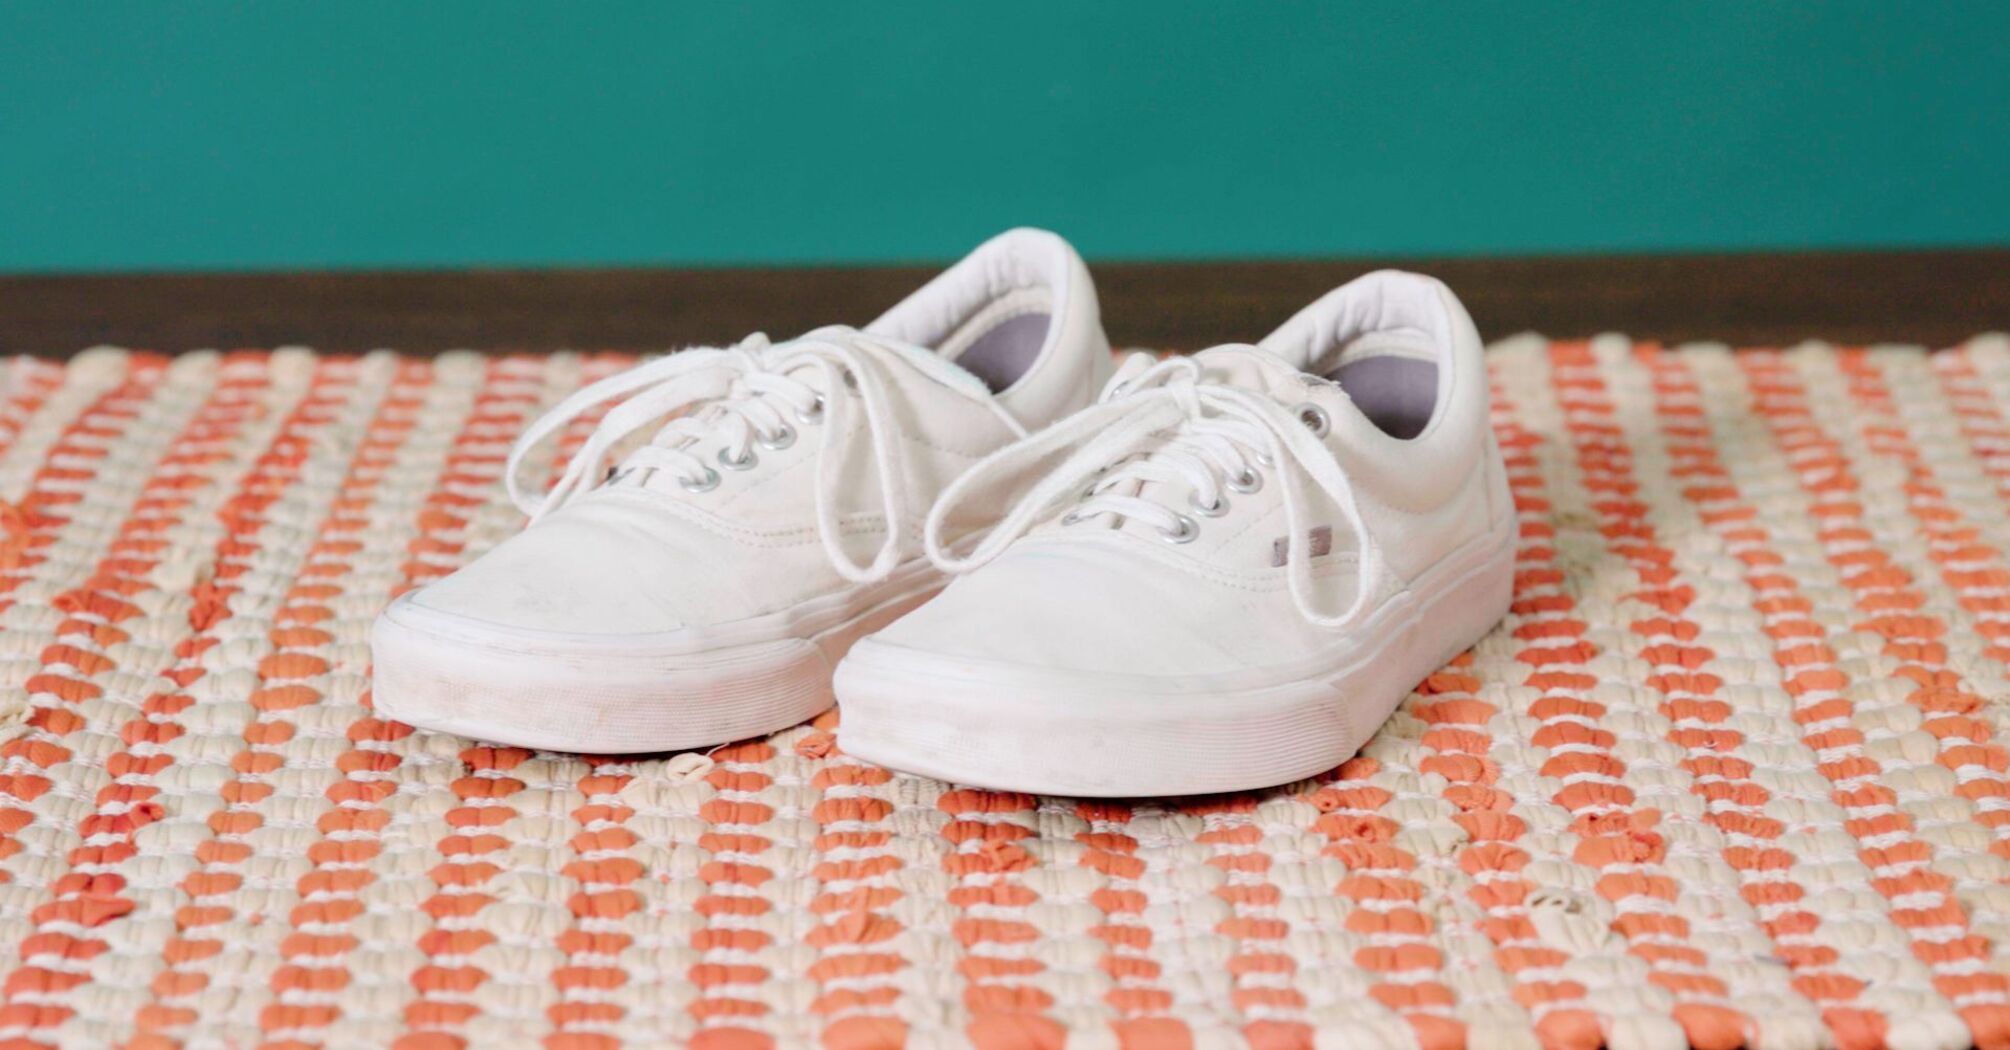 How to whiten sneakers at home